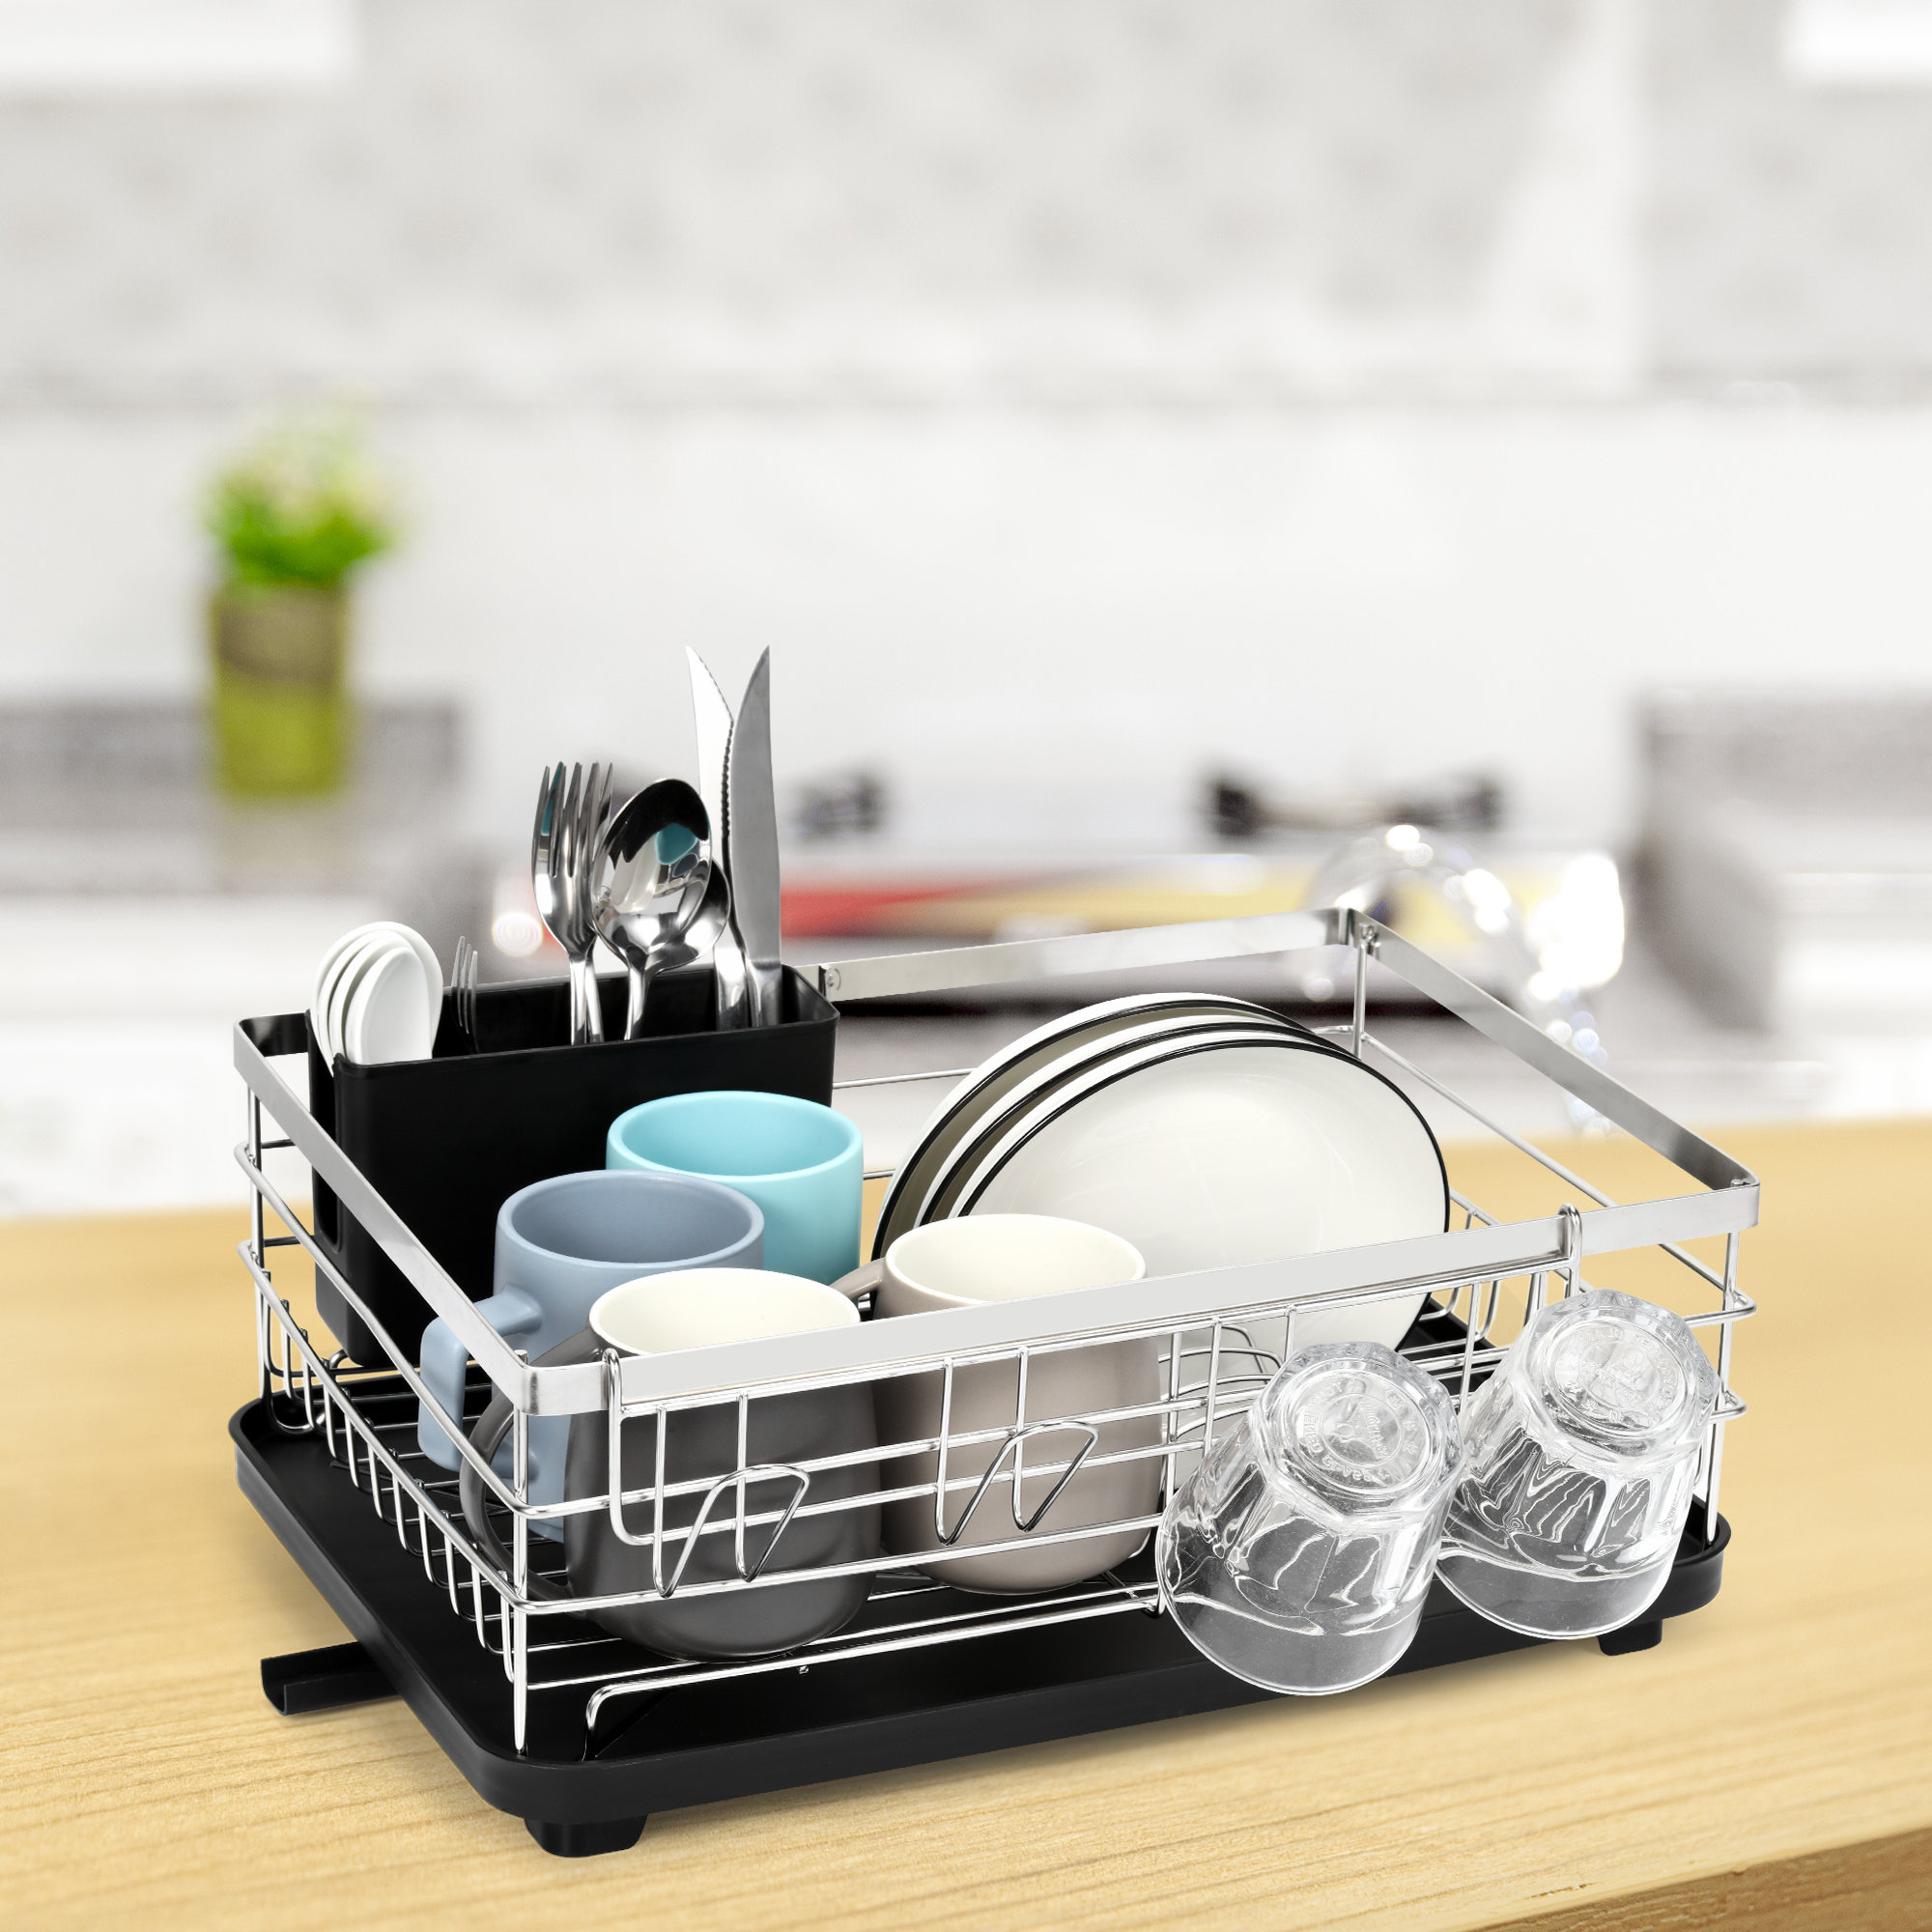 HUFTGOLD Dish Drying Rack, Steel Dish Drainer with Utensil Holder, Kitchen Countertop Organizer with Drying Tray, Black